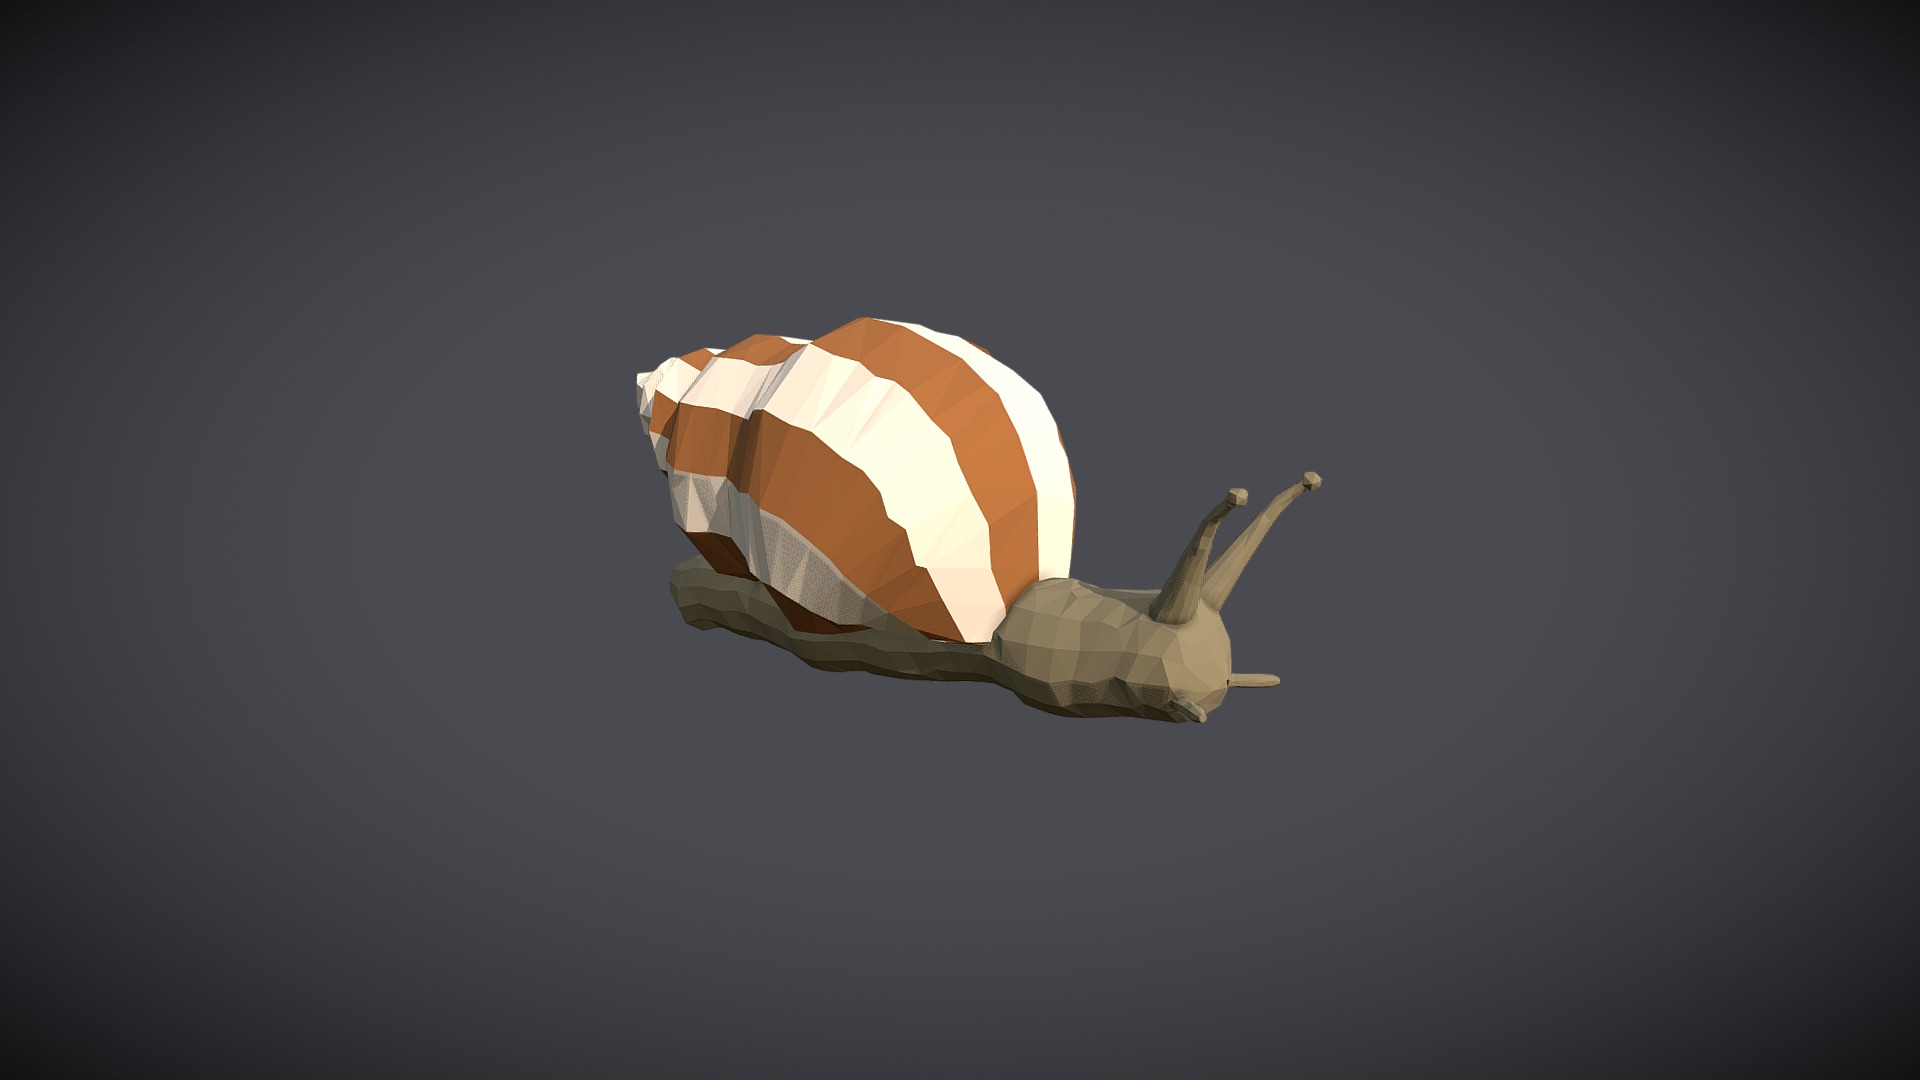 3D model Low-Poly Snail - This is a 3D model of the Low-Poly Snail. The 3D model is about a person holding a parachute.